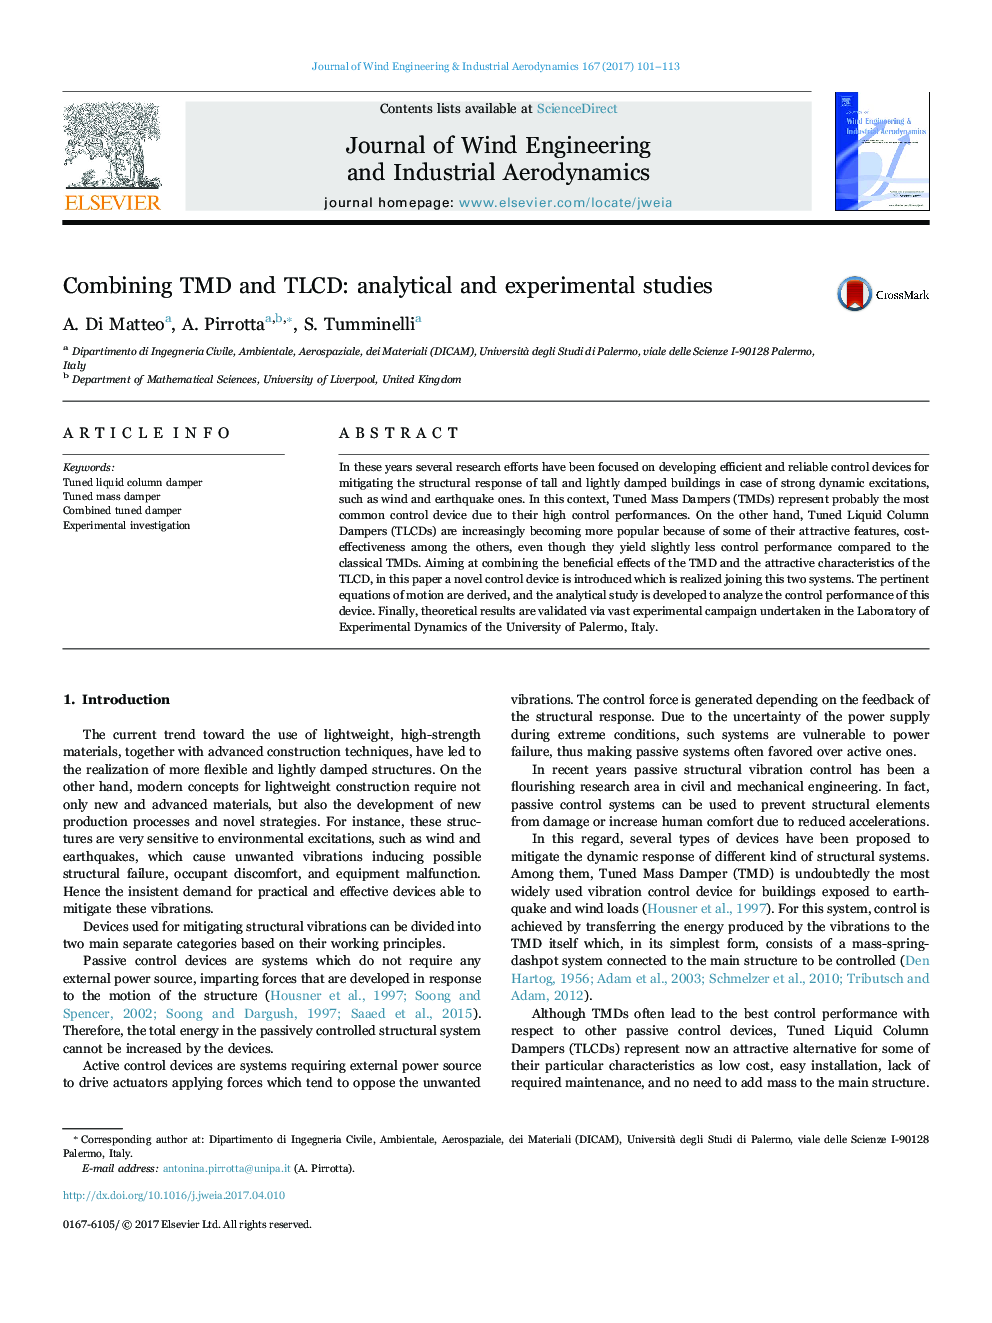 Combining TMD and TLCD: analytical and experimental studies